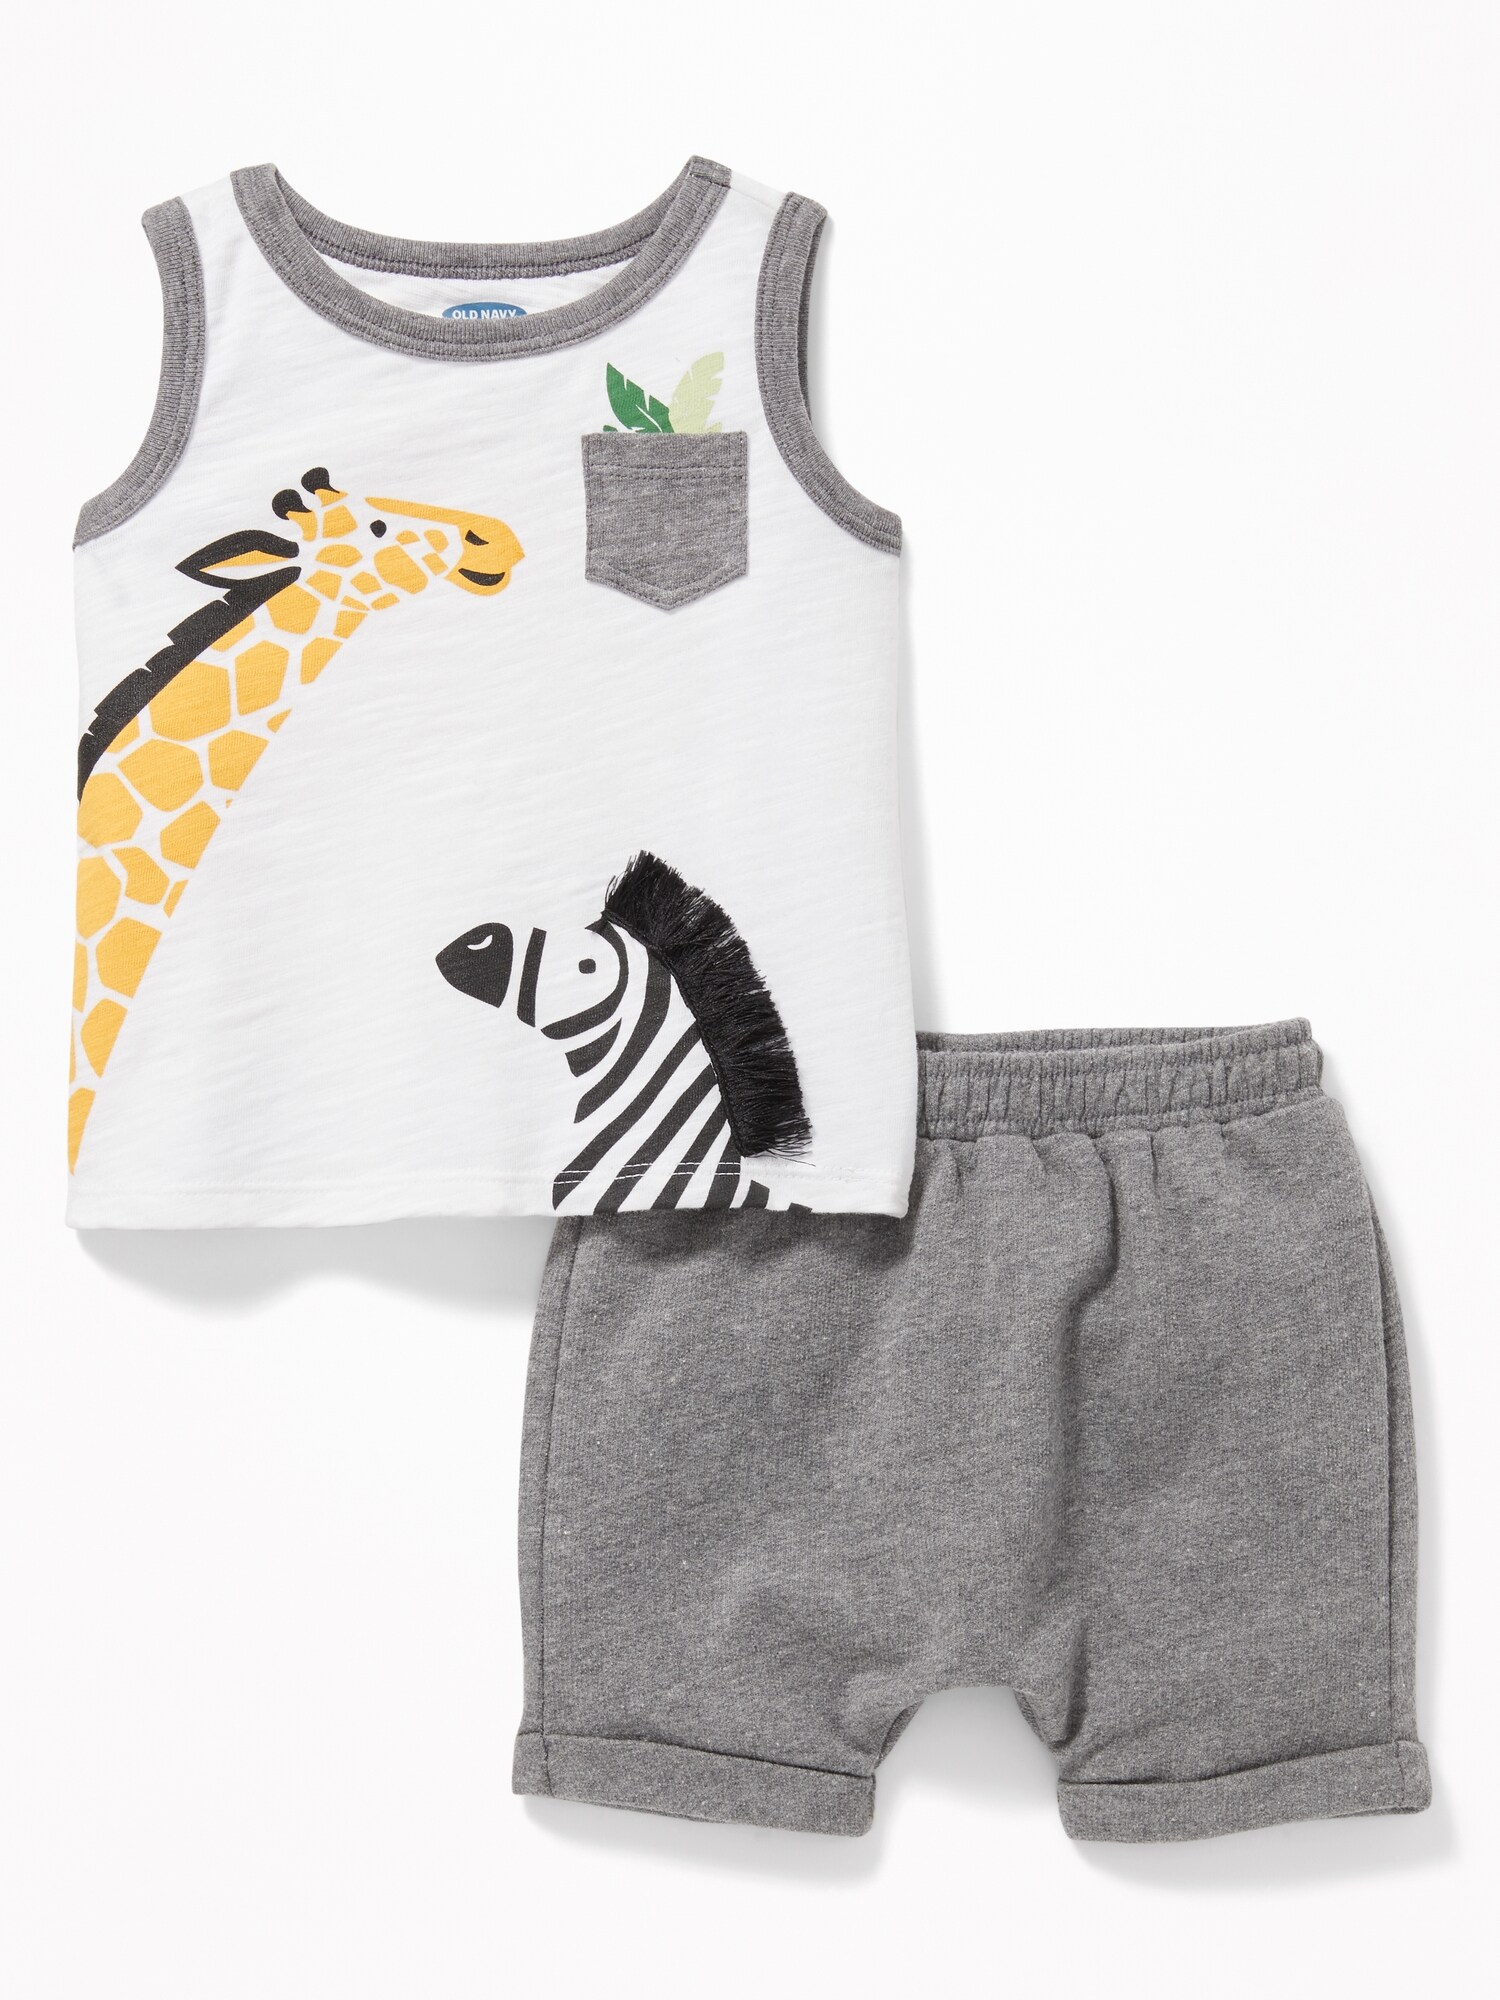 Graphic Pocket Tank & French Terry Shorts Set for Baby | Old Navy